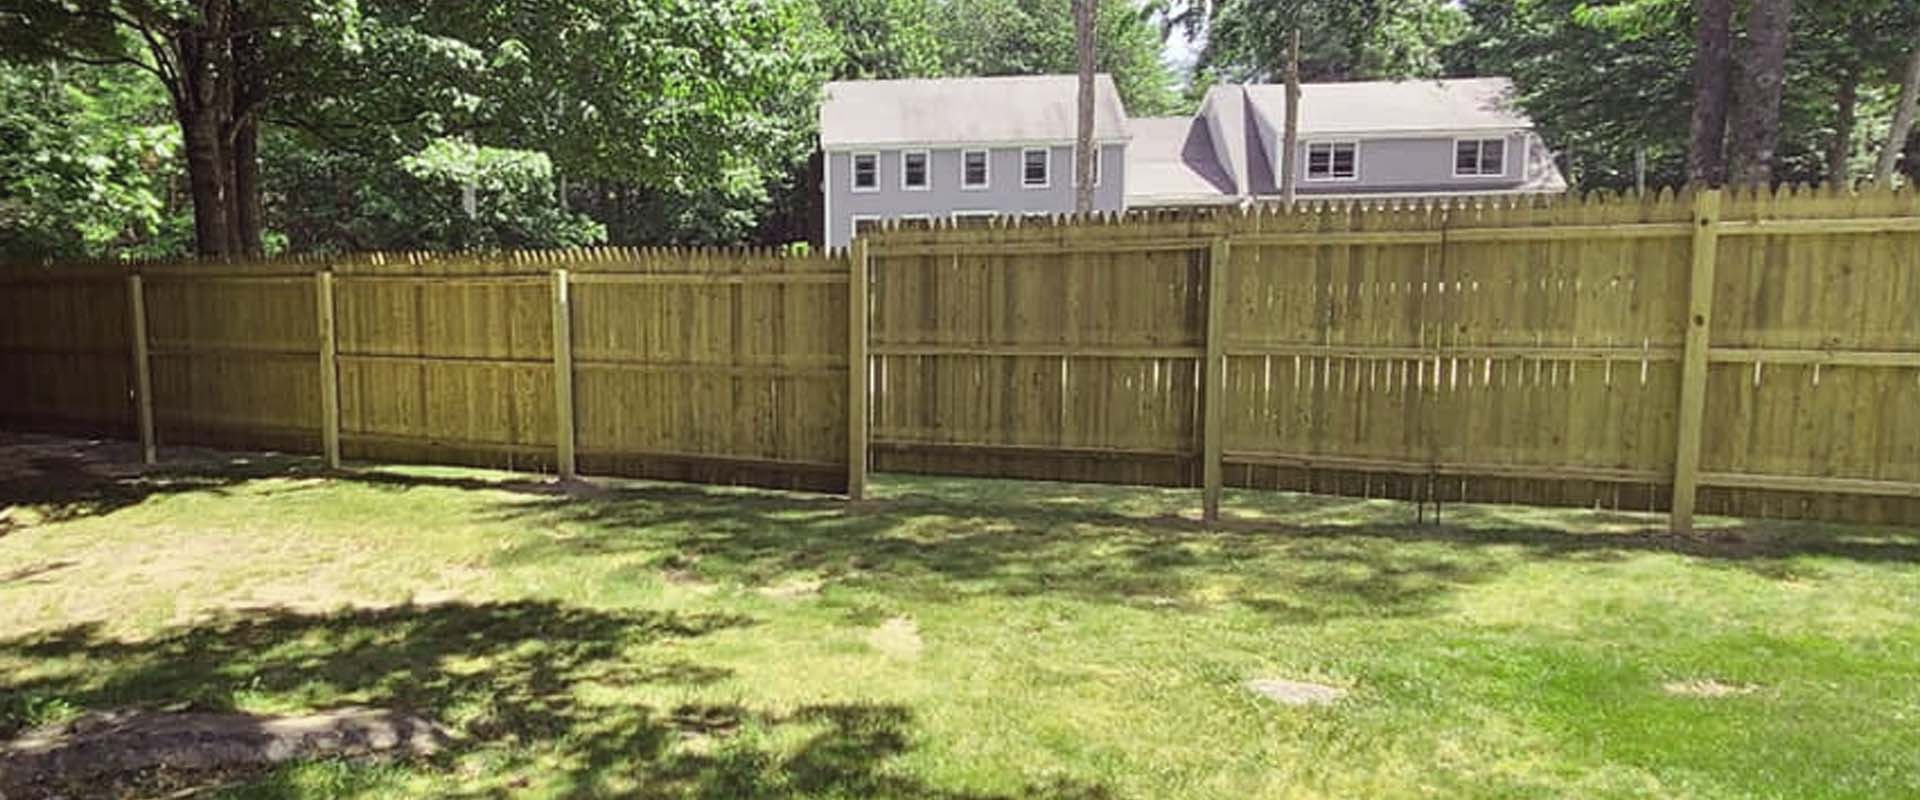 Best fence contractor in southern Maine